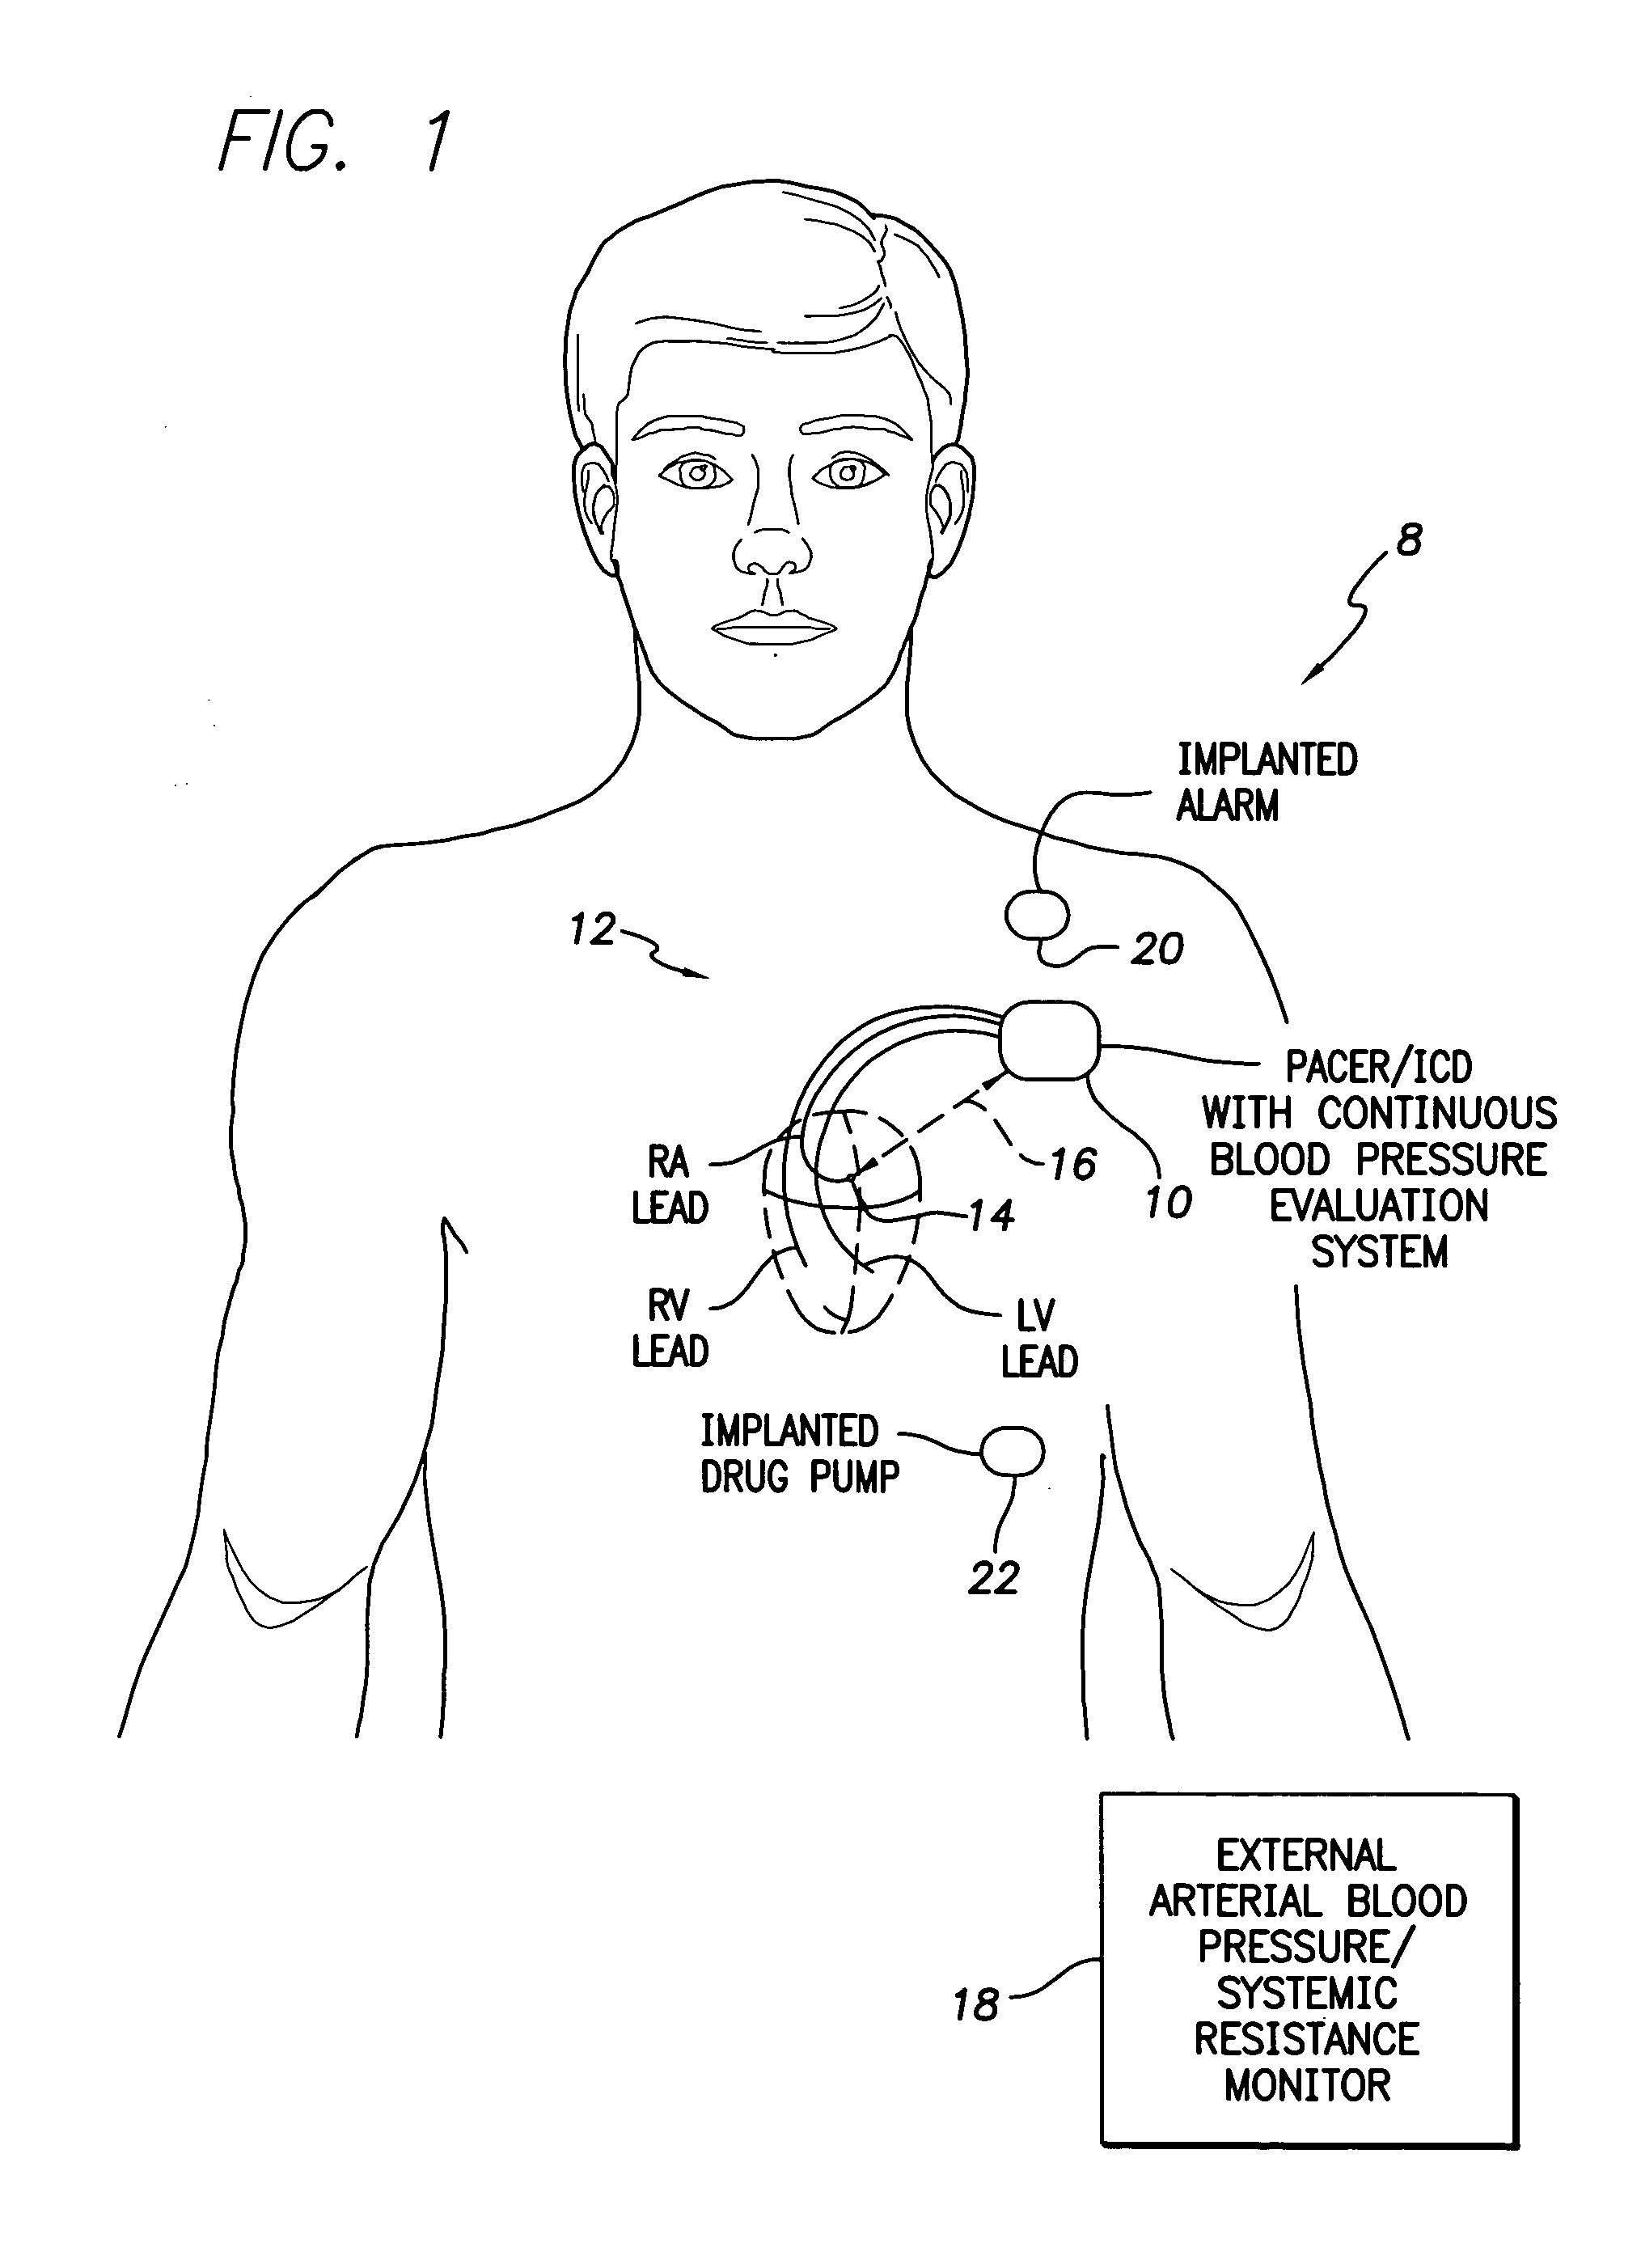 System and method for detecting arterial blood pressure based on aortic electrical resistance using an implantable medical device